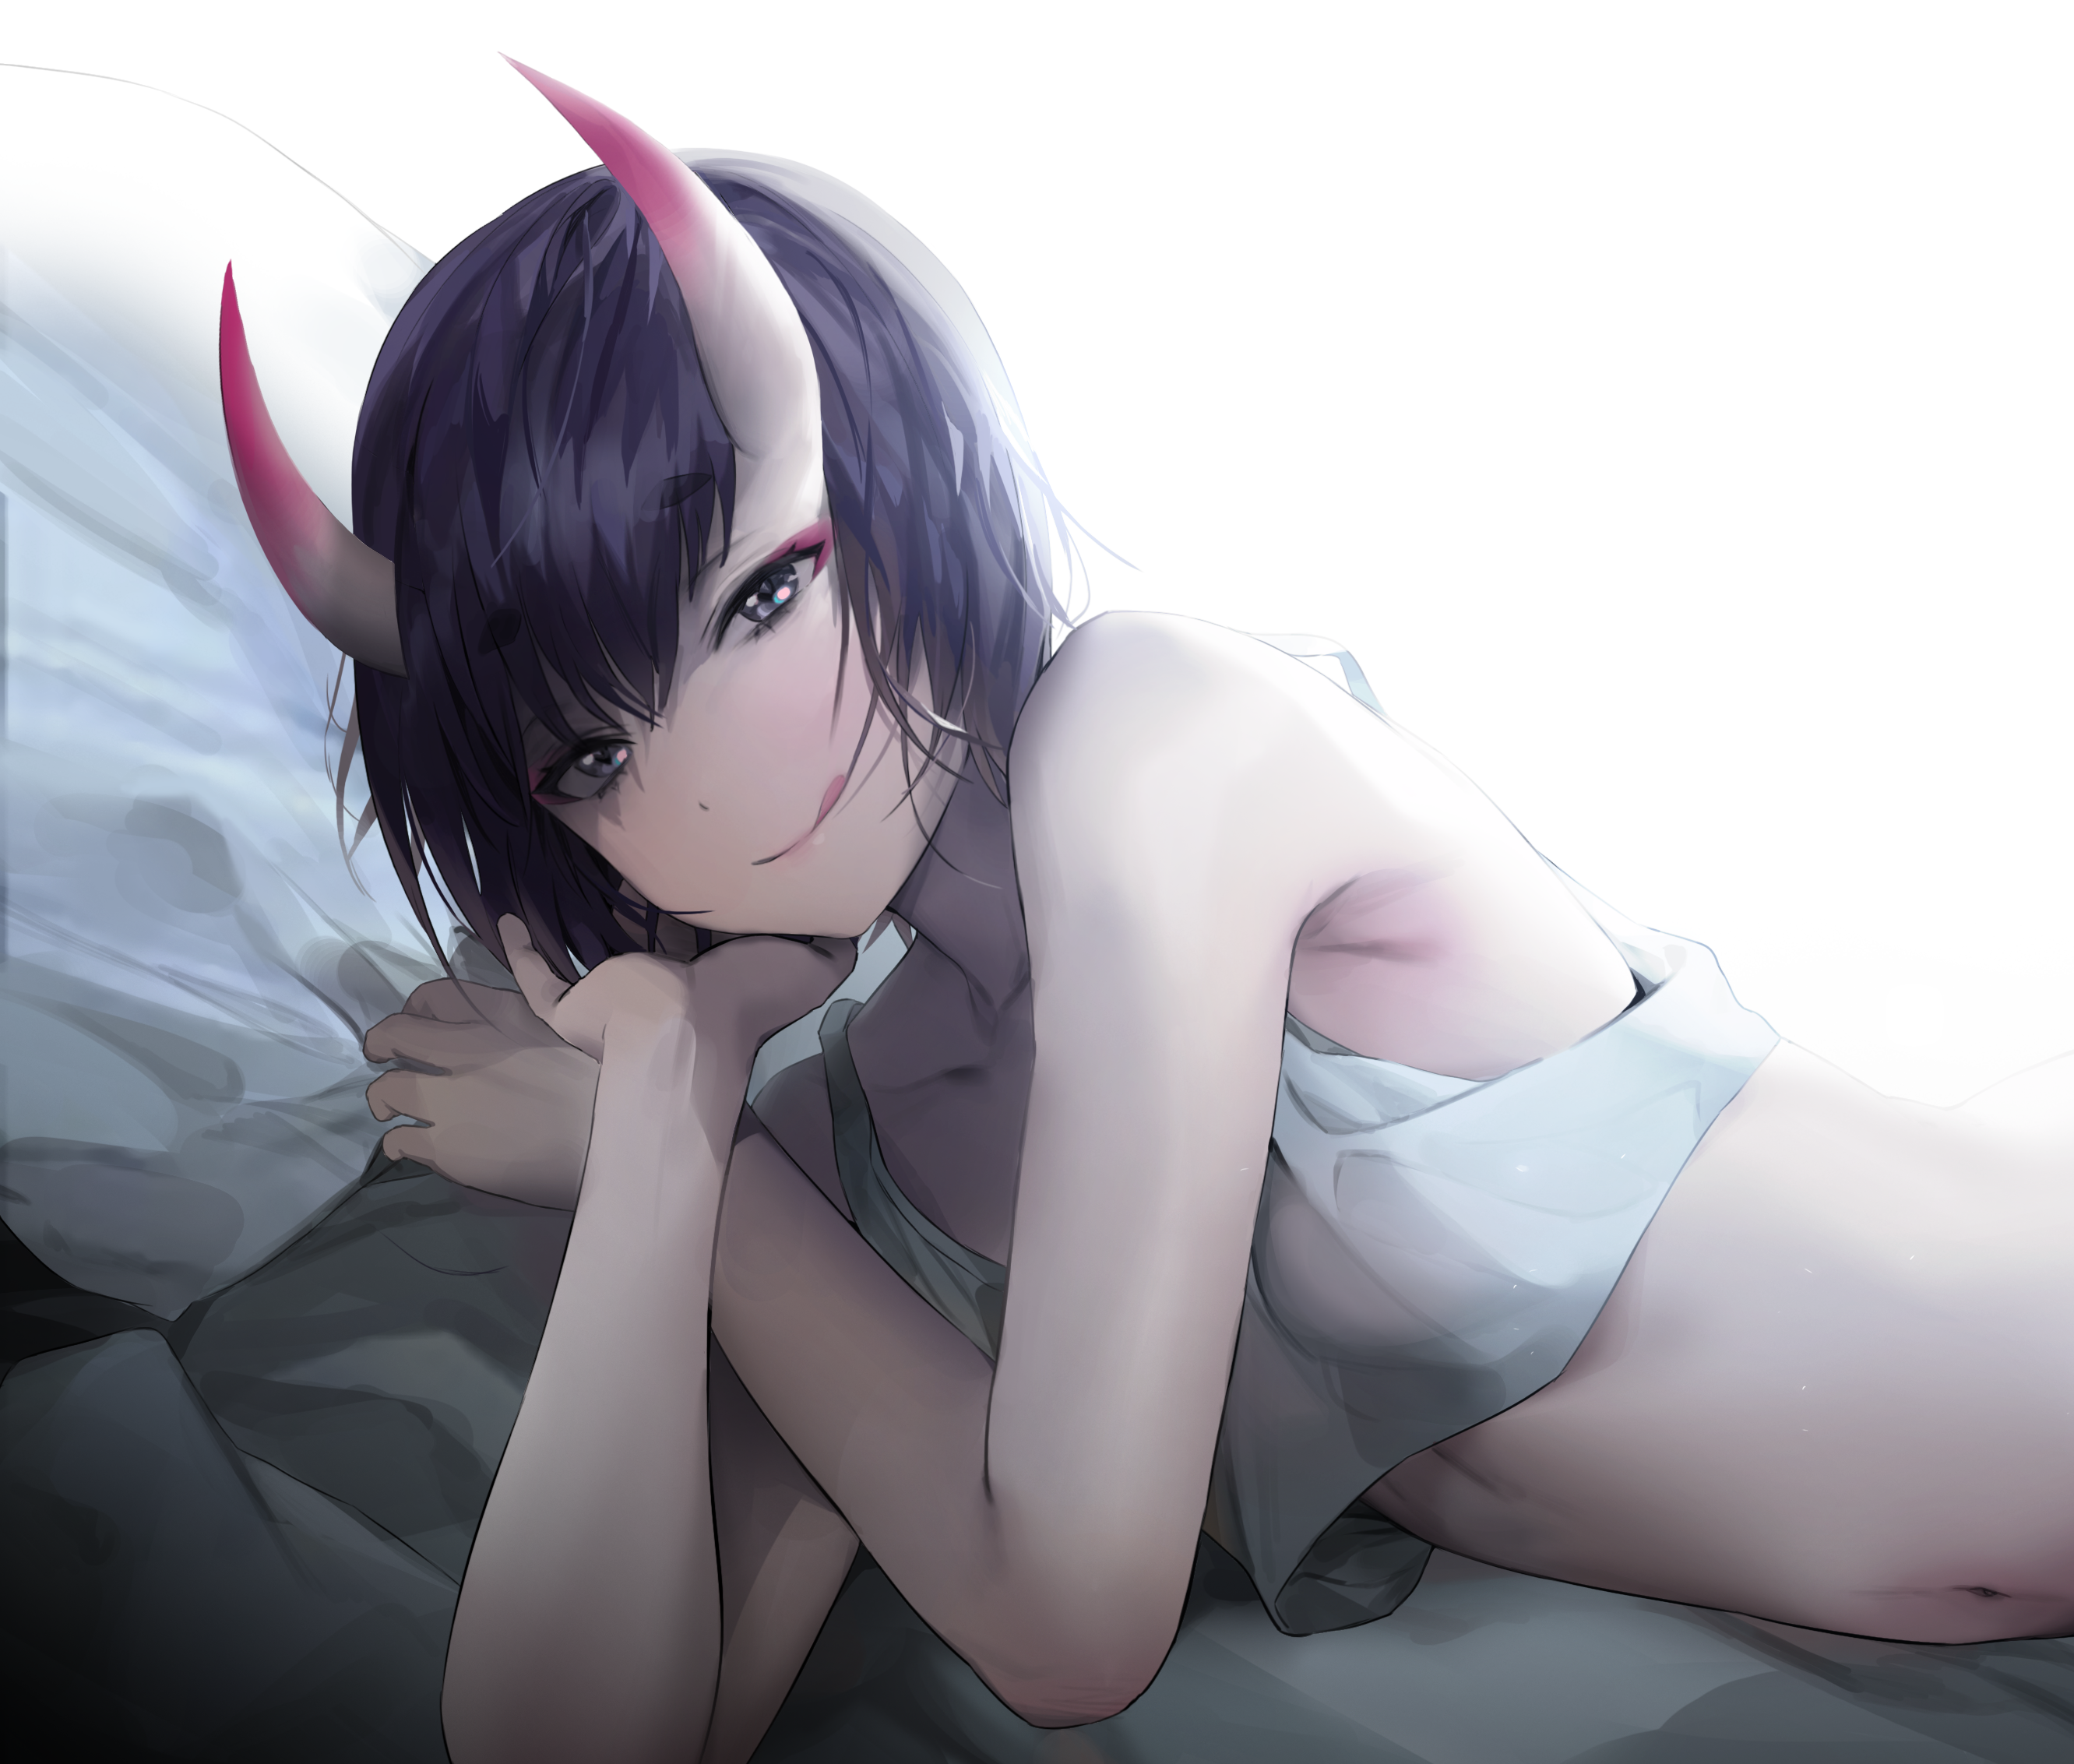 Anime 2663x2265 anime anime girls Fate series Fate/Grand Order horns Shuten Douji (Fate/Grand Order) UTHY in bed oni girl short hair dark hair dark eyes tongue out lying on side crop top